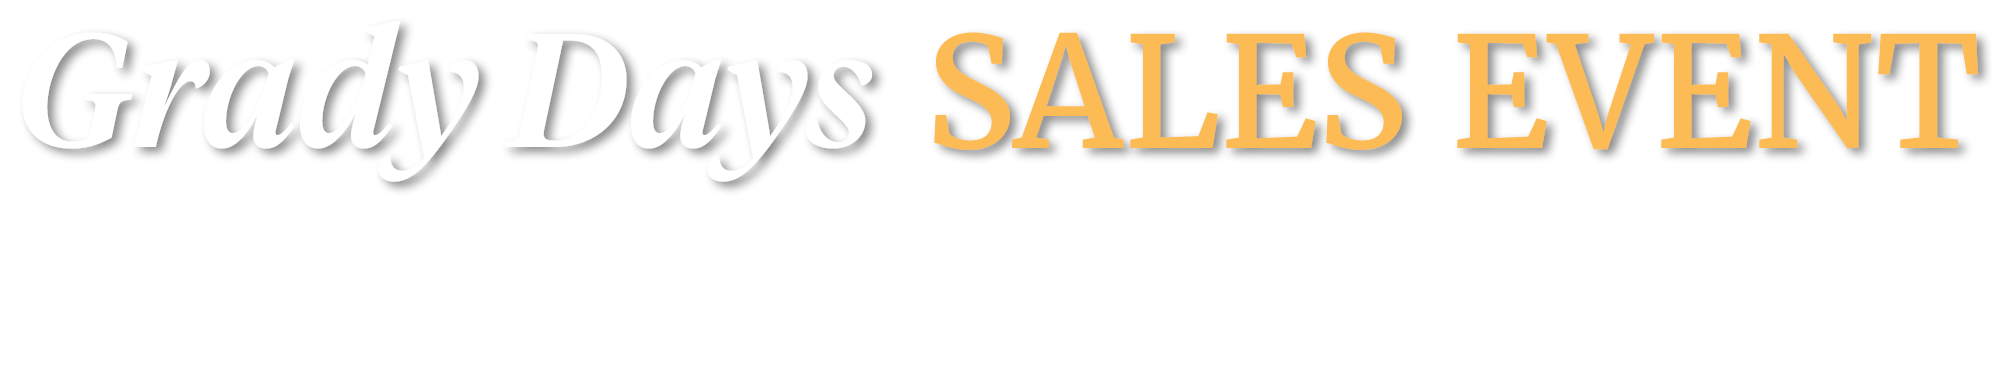 Grady Days Sales Event - Live Your Dream Today!